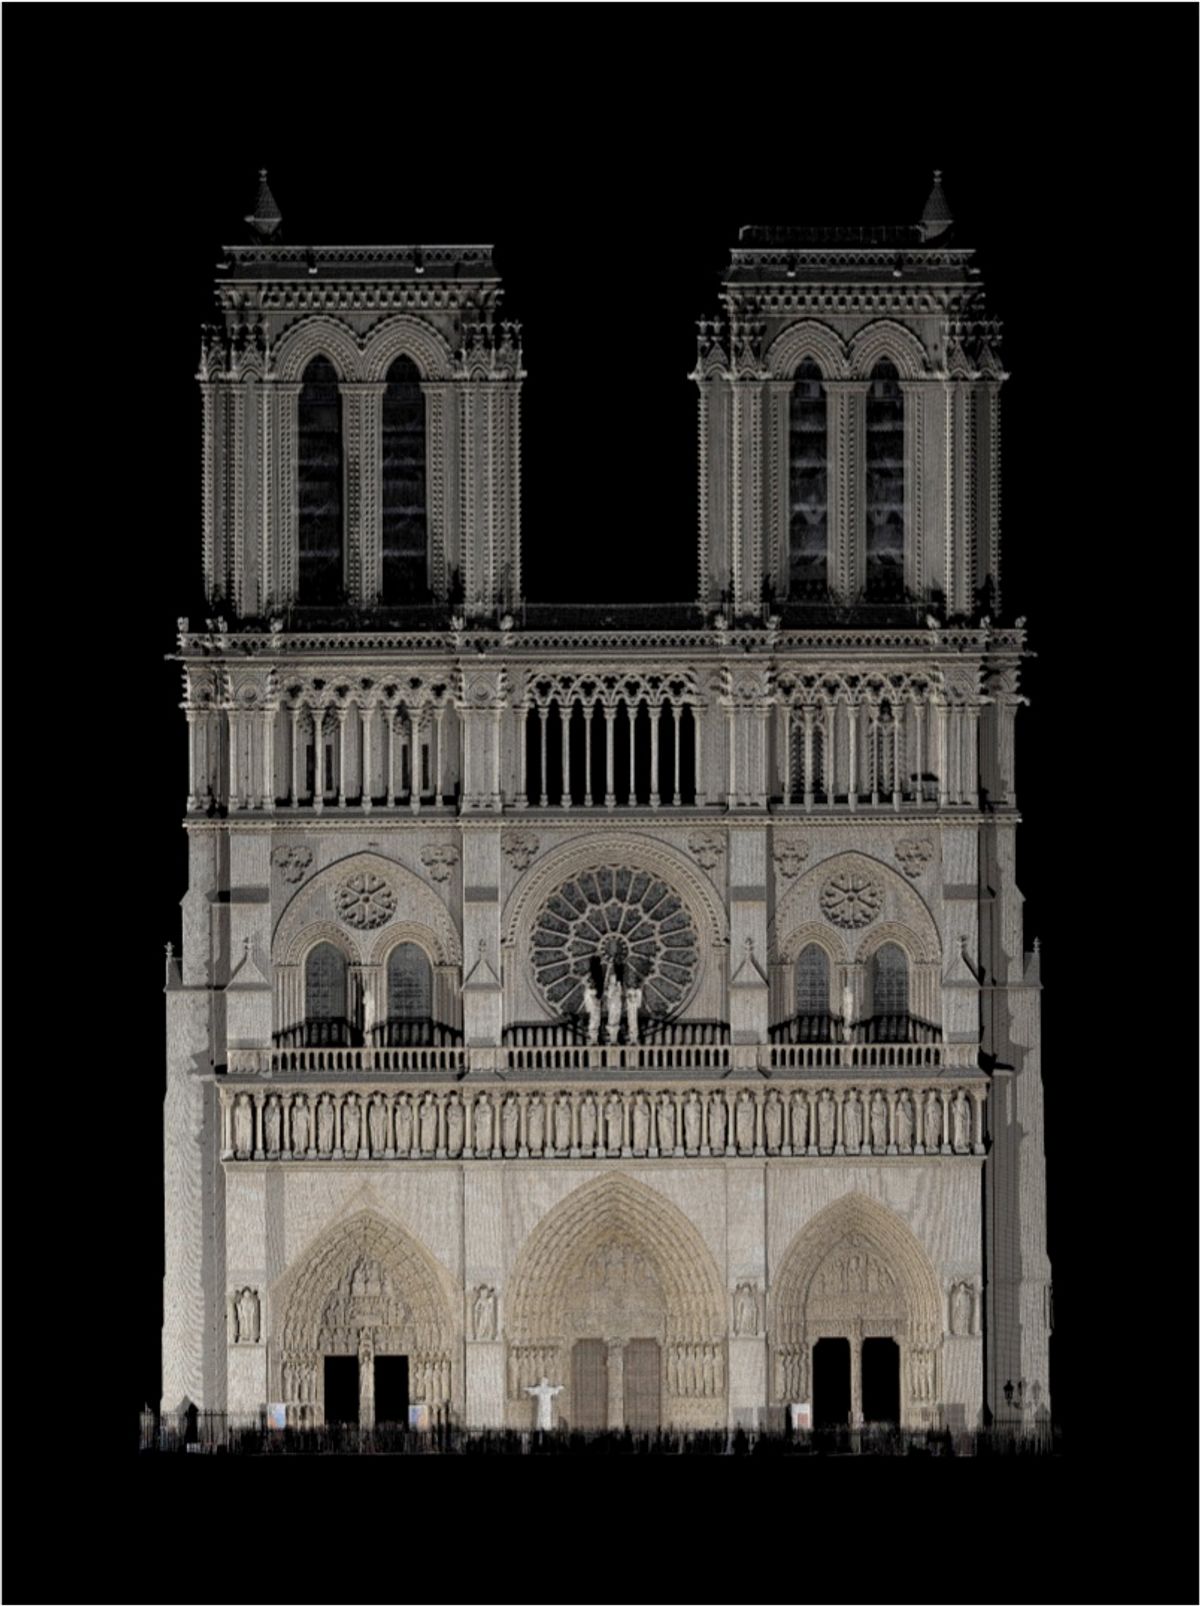 A 2012 scan of the western frontispiece of the Cathedral of Notre Dame Andrew Tallon